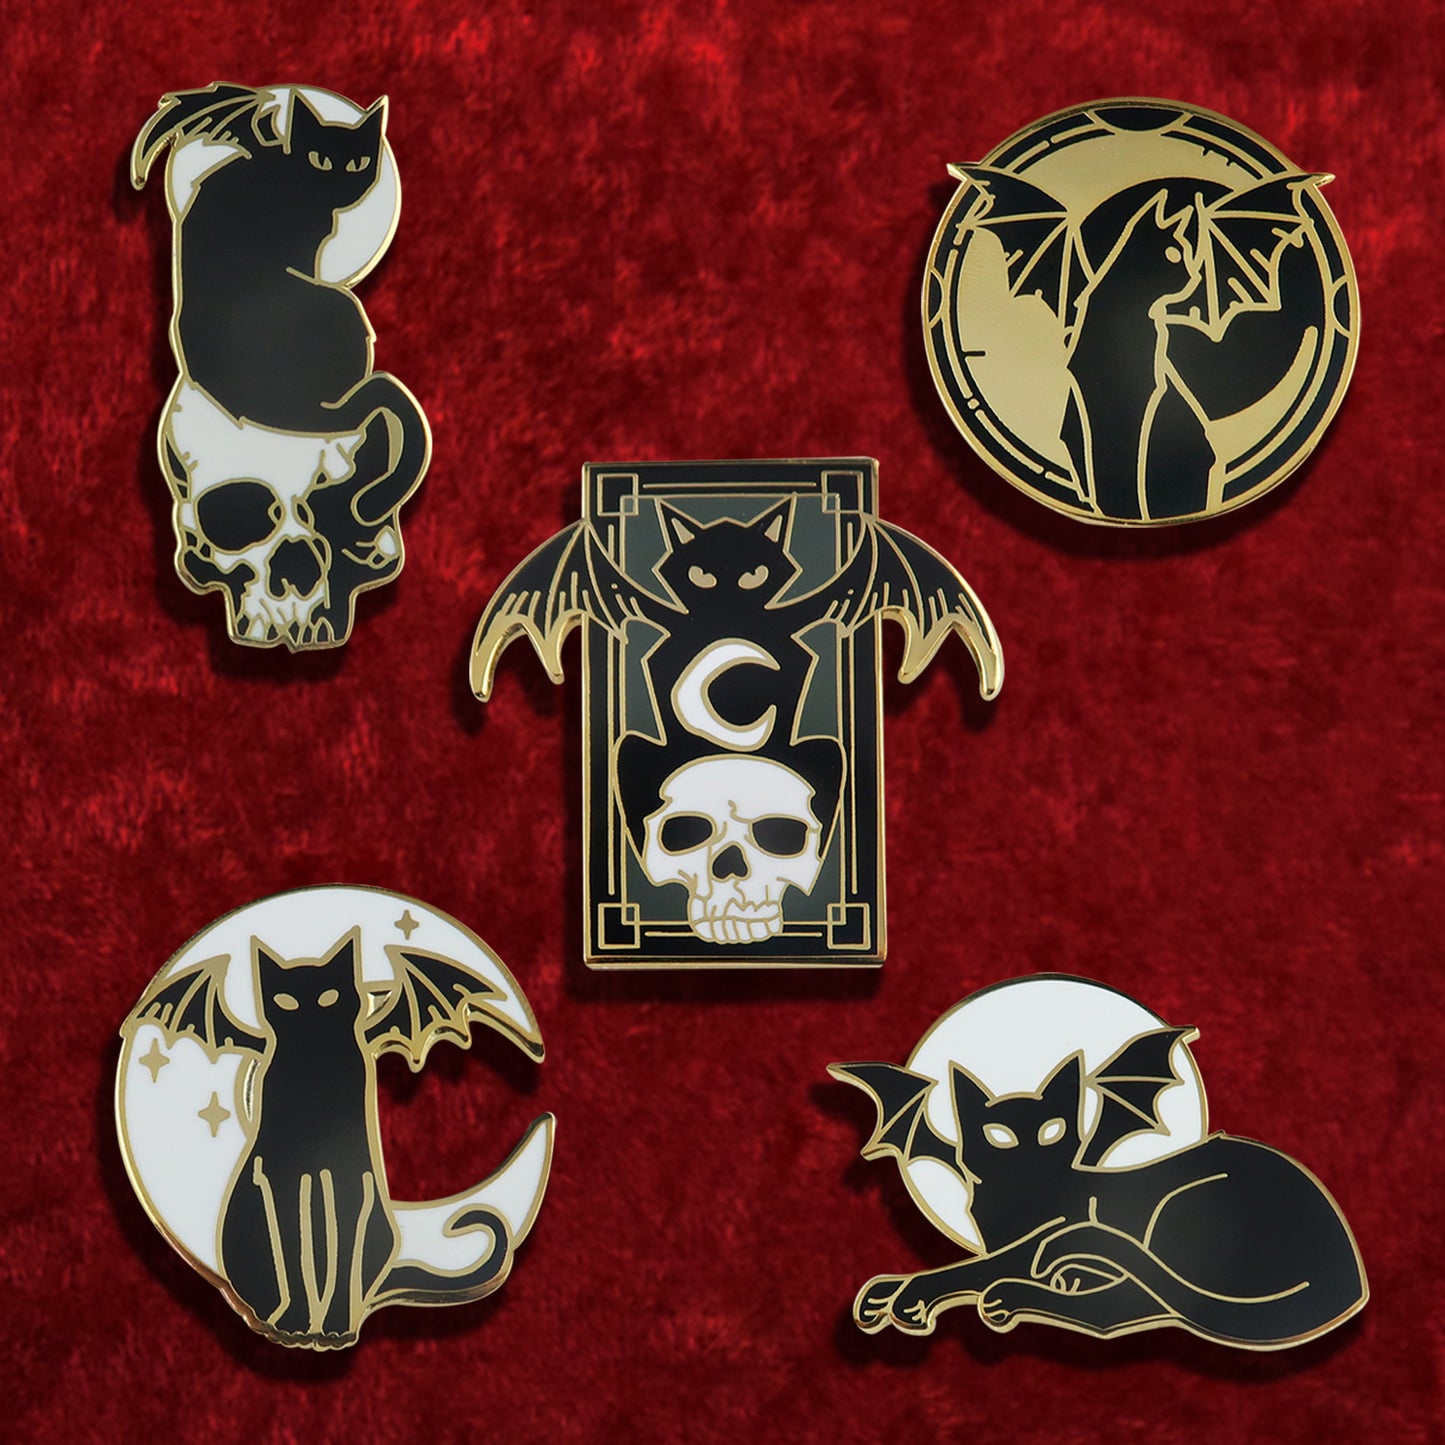 Five black and yellow enamel pins against a red background. Each pin depicts a black cat with bat wings, in various poses.